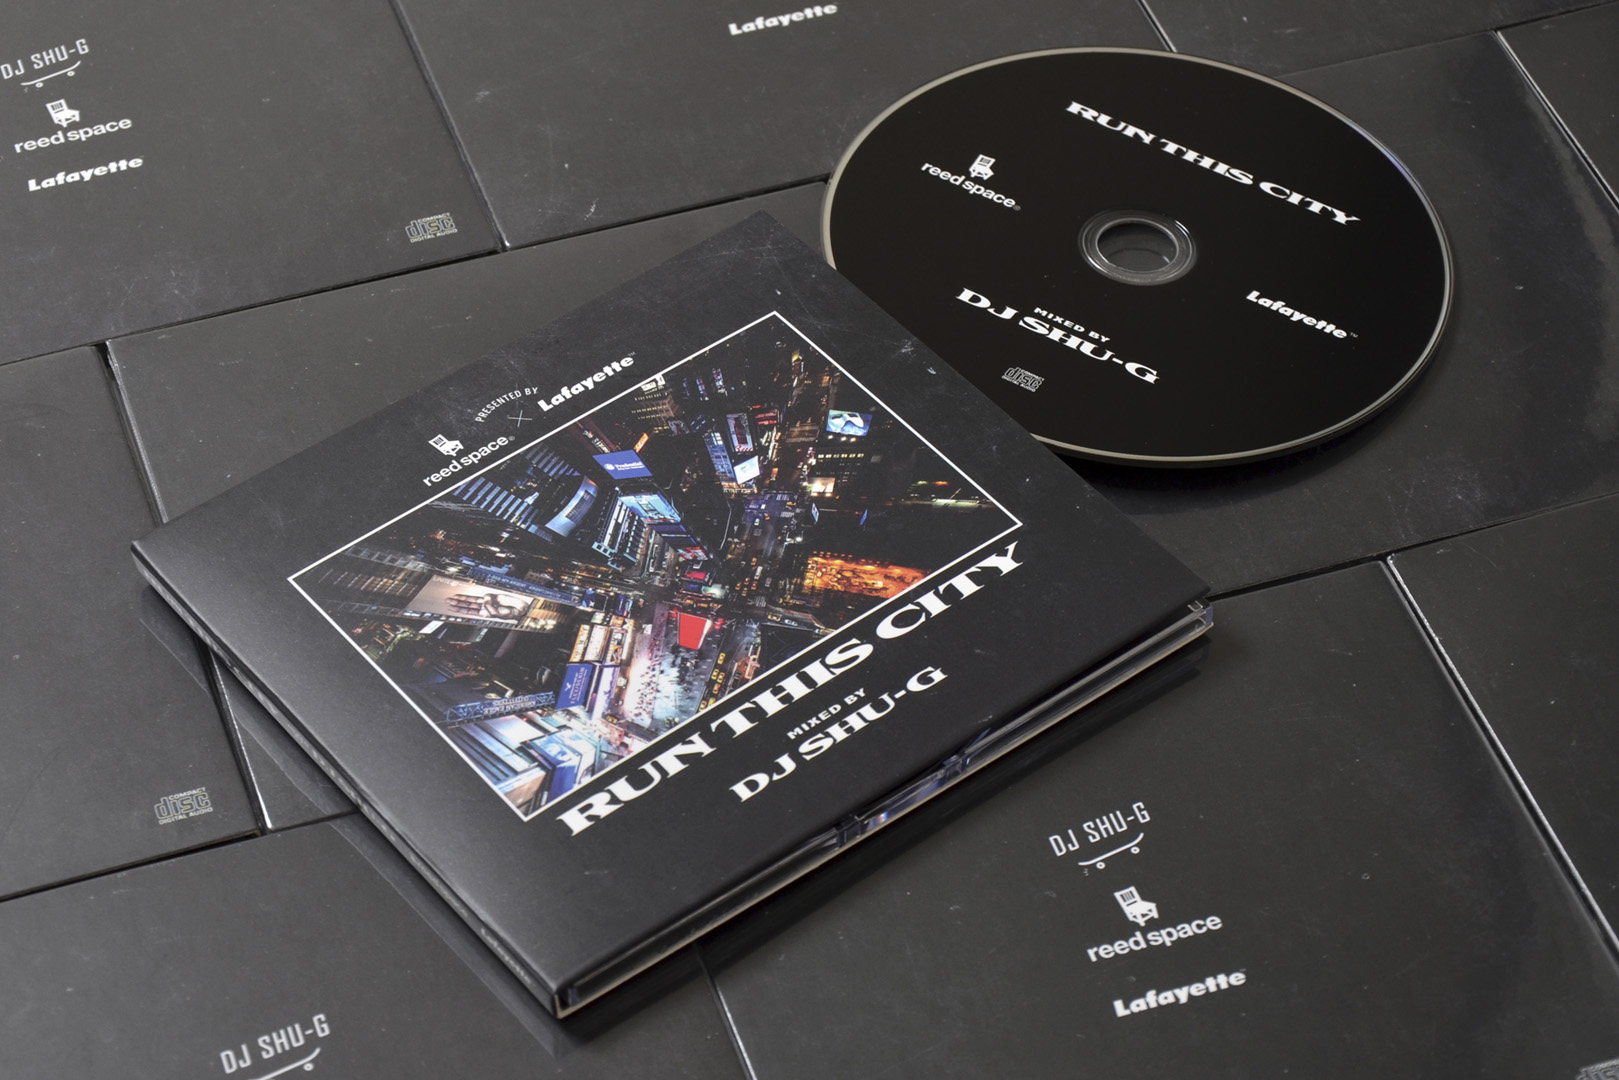 reed space x Lafayette x DJ SHU-G – RUN THIS CITY COLLECTION